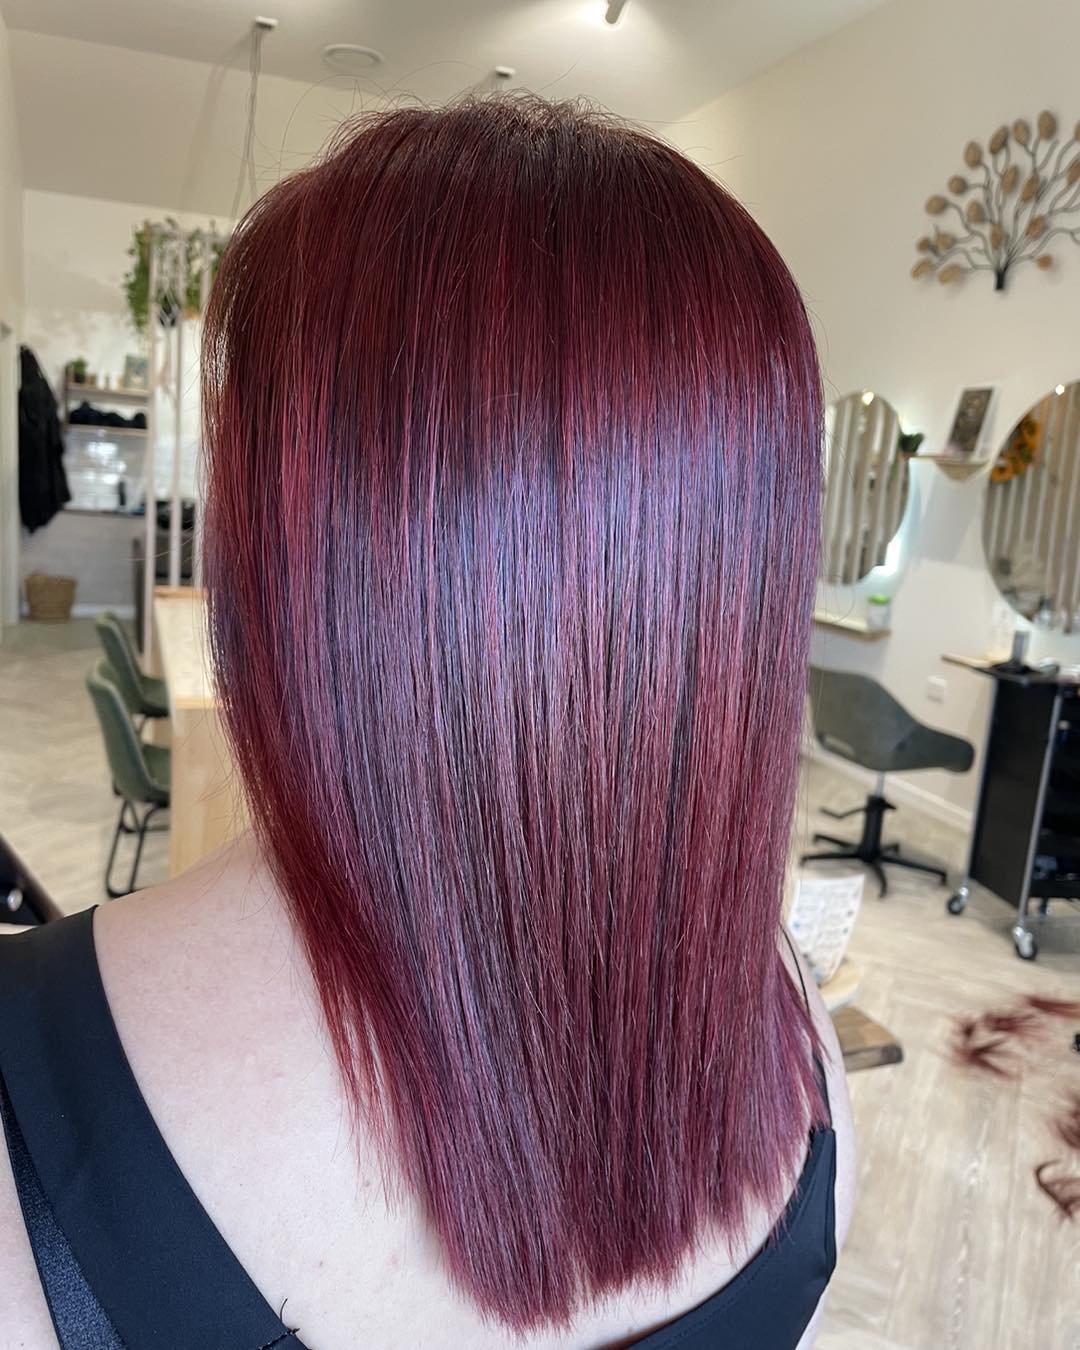 When you&rsquo;re after a BIG change this is the colour to go! ✨✨ Colour created by Sarah ✨✨ Swpie ➡️➡️ for the before. 
#red #creative #mahogany #hair #purehaircare